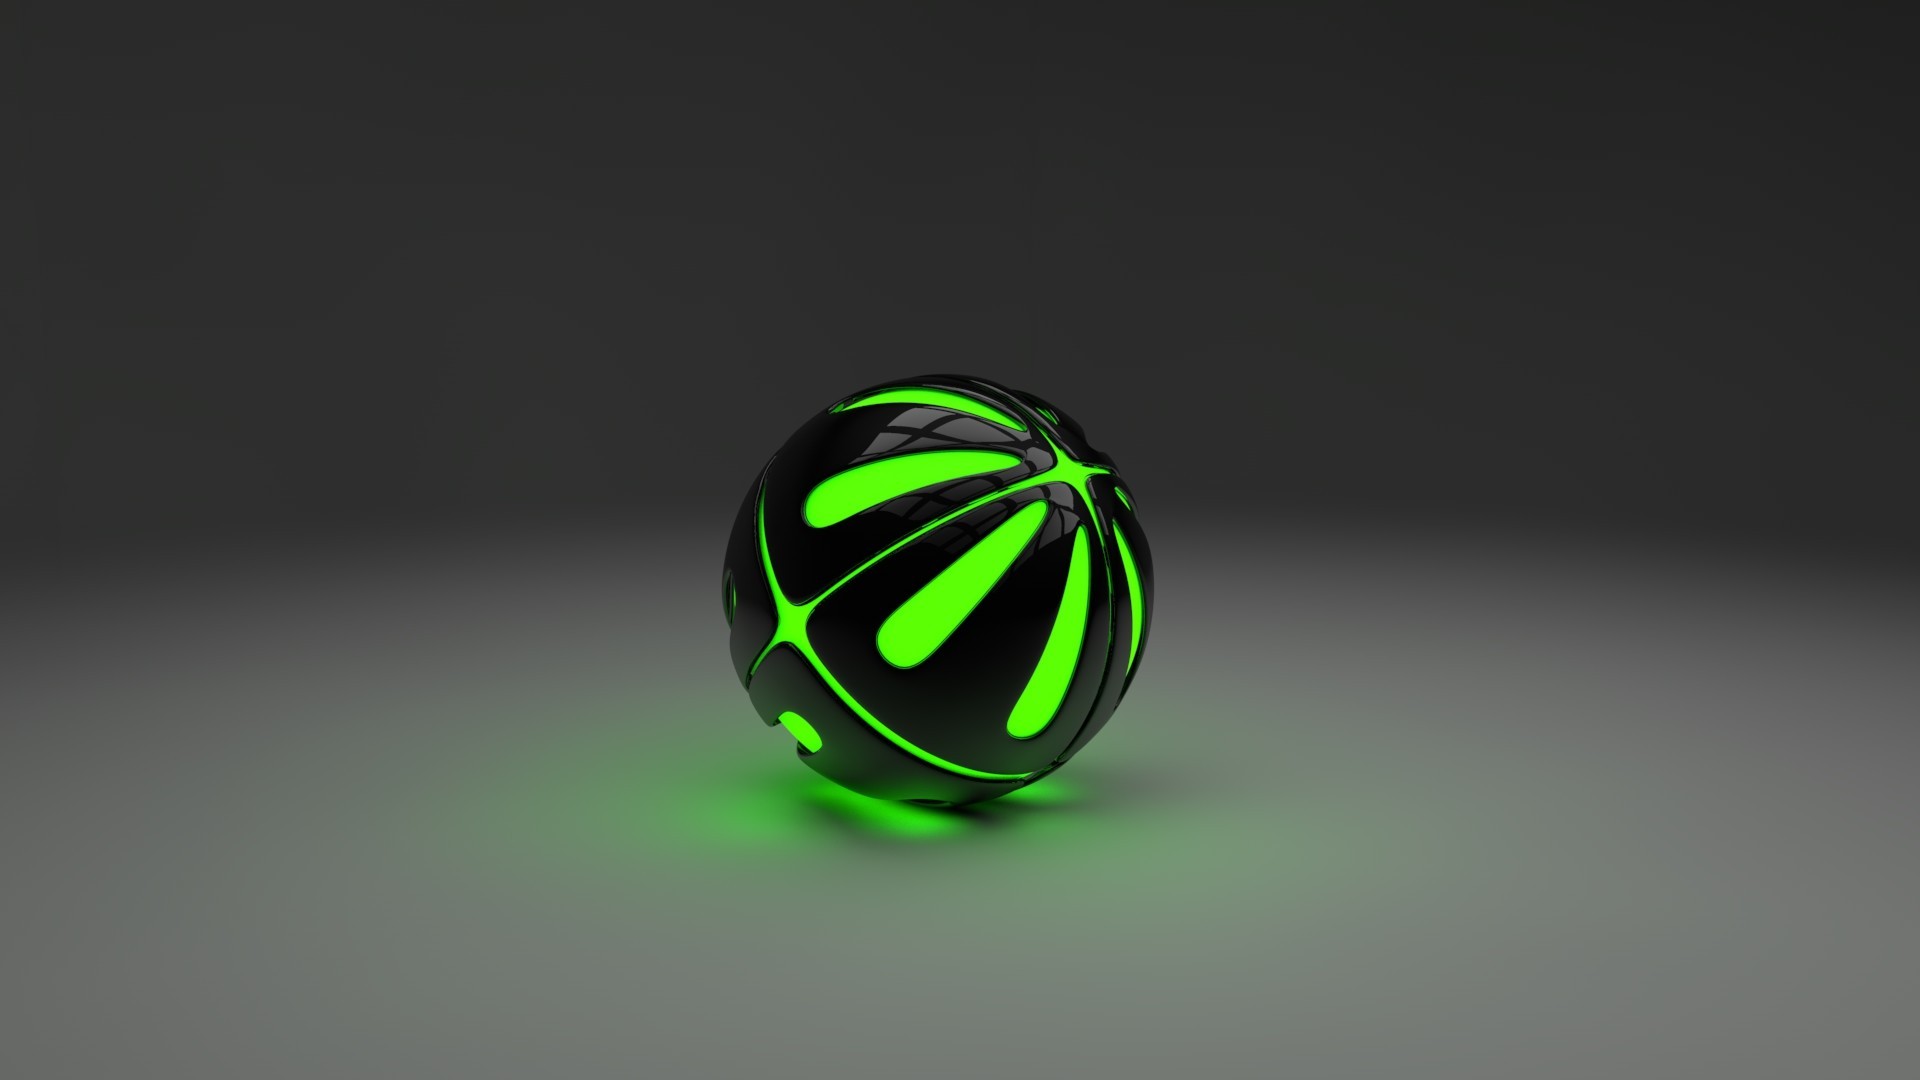 General 1920x1080 CGI ball minimalism sphere simple background digital art green abstract 3D Abstract digital glowing glowing